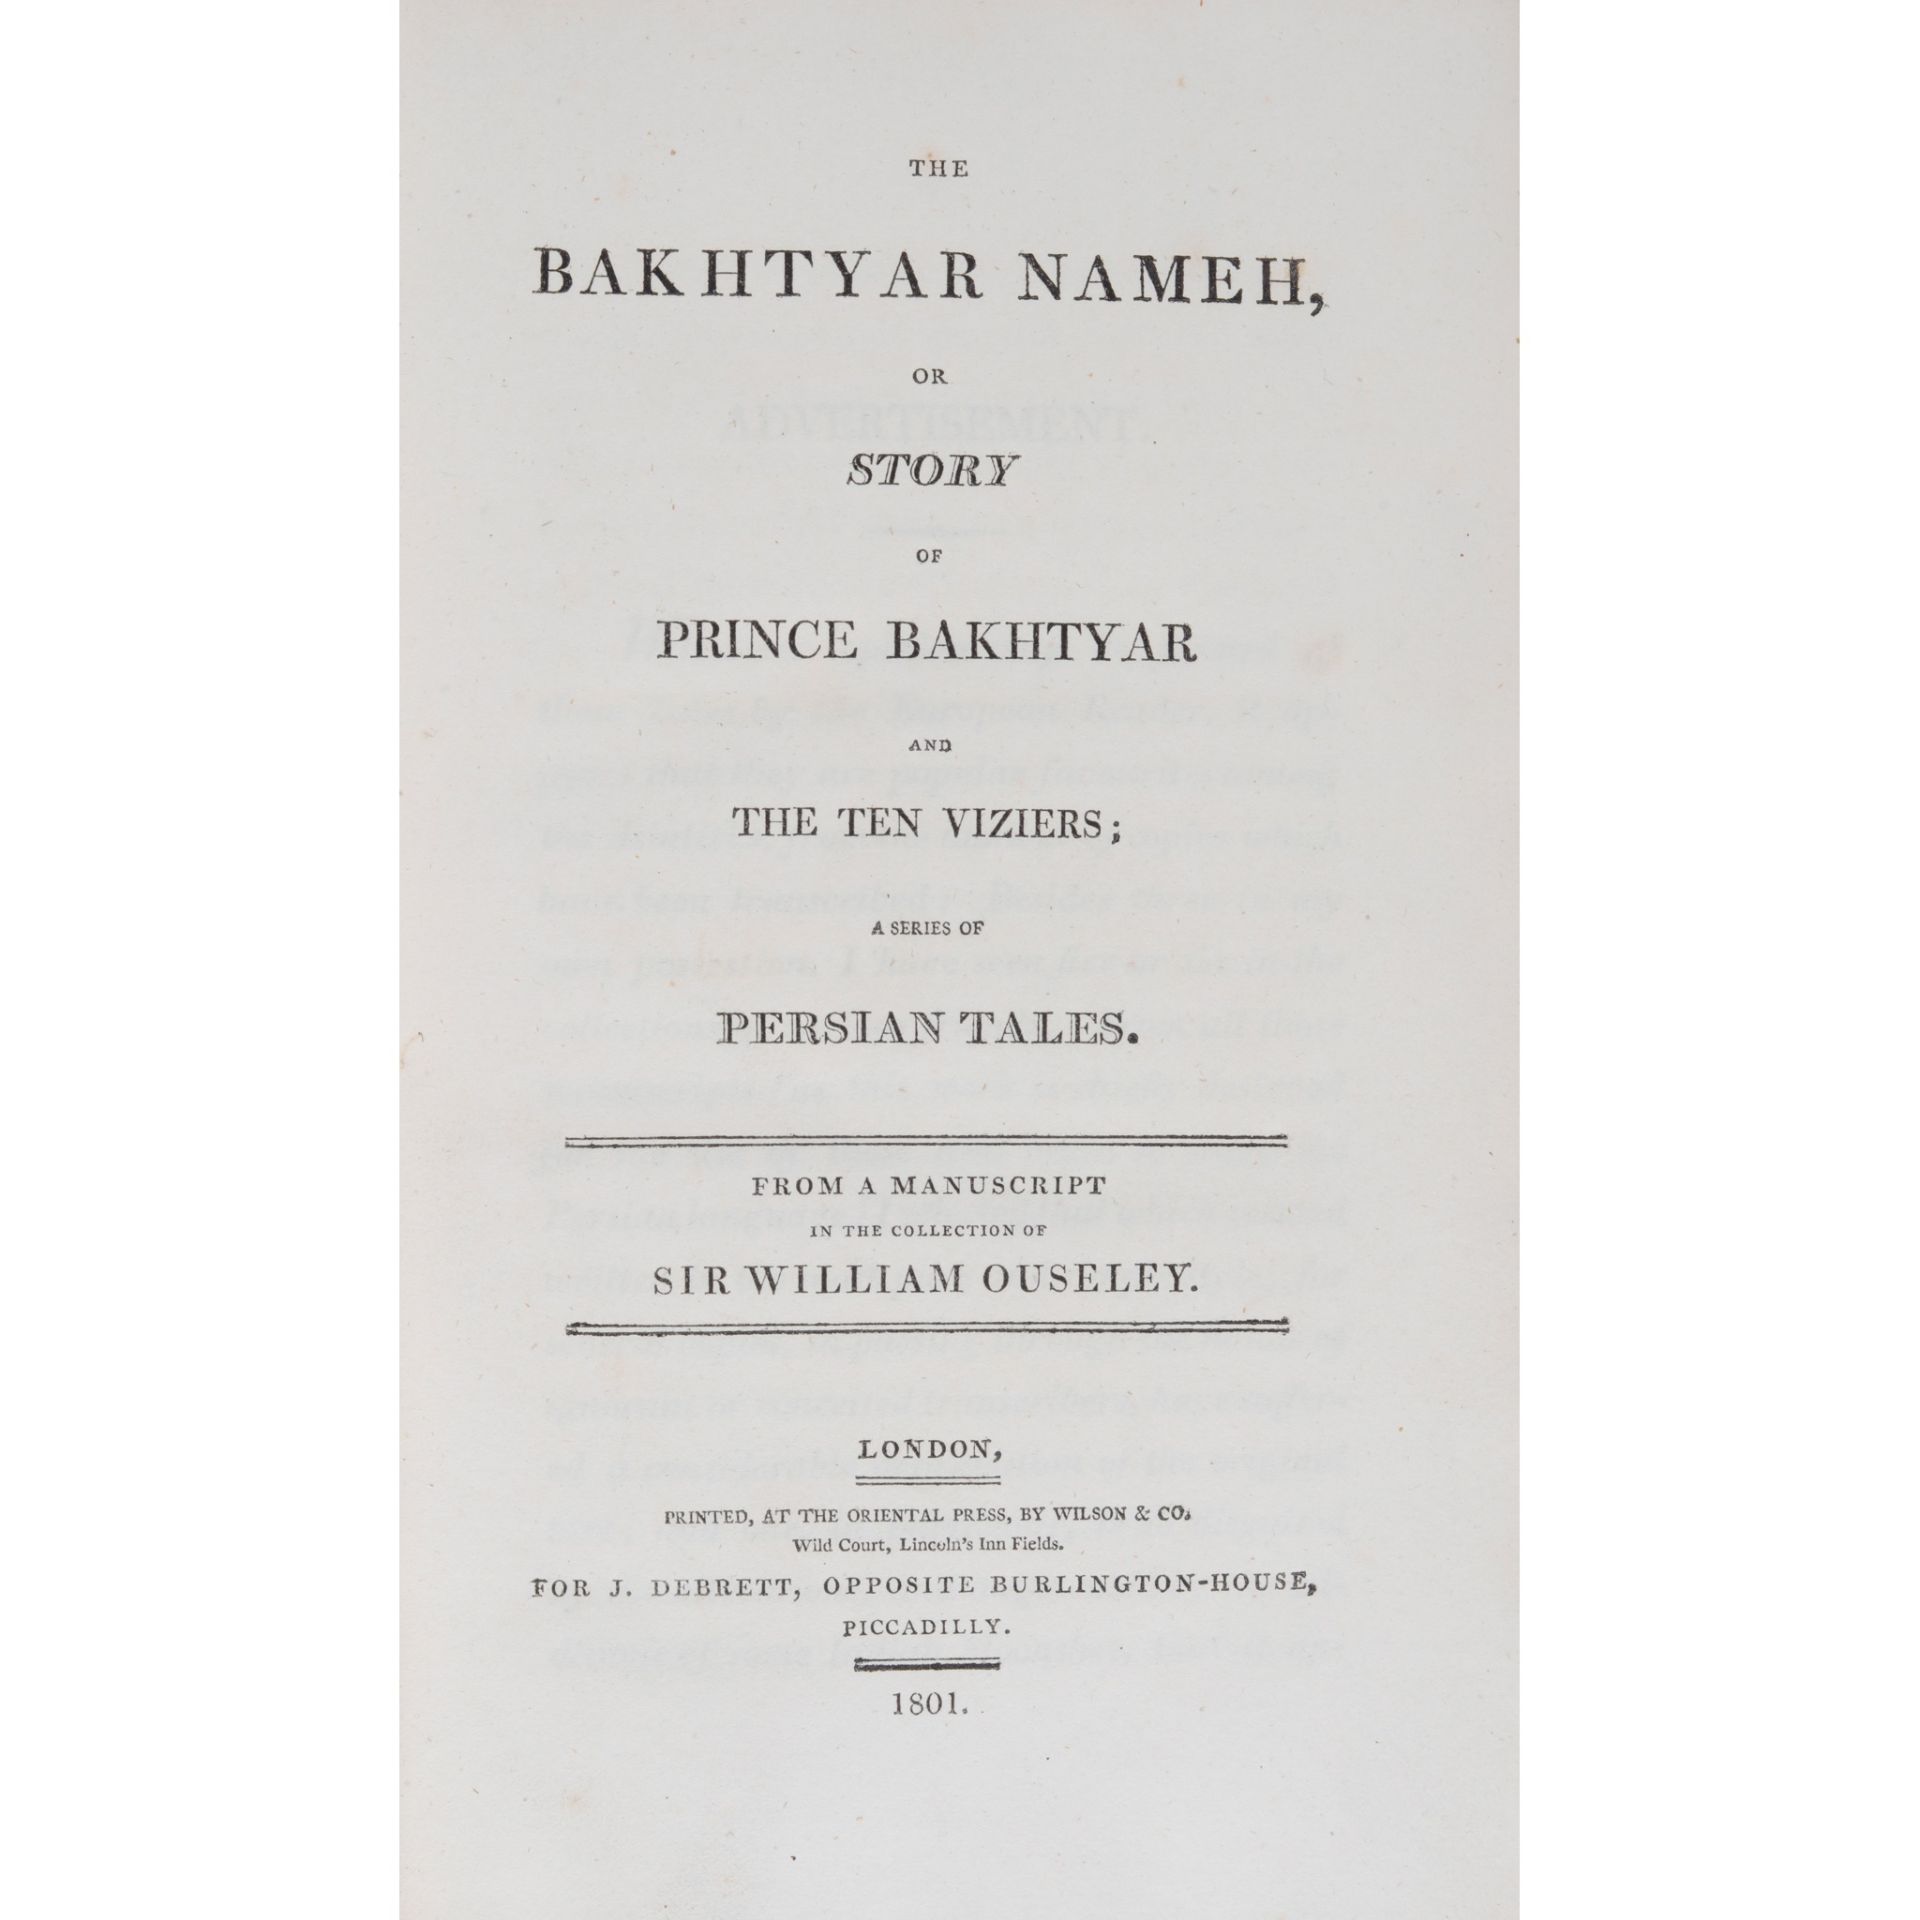 Ouseley, Sir William, translator The Bakhtyar Nameh, or Story of Prince Bakhtyar and the Ten